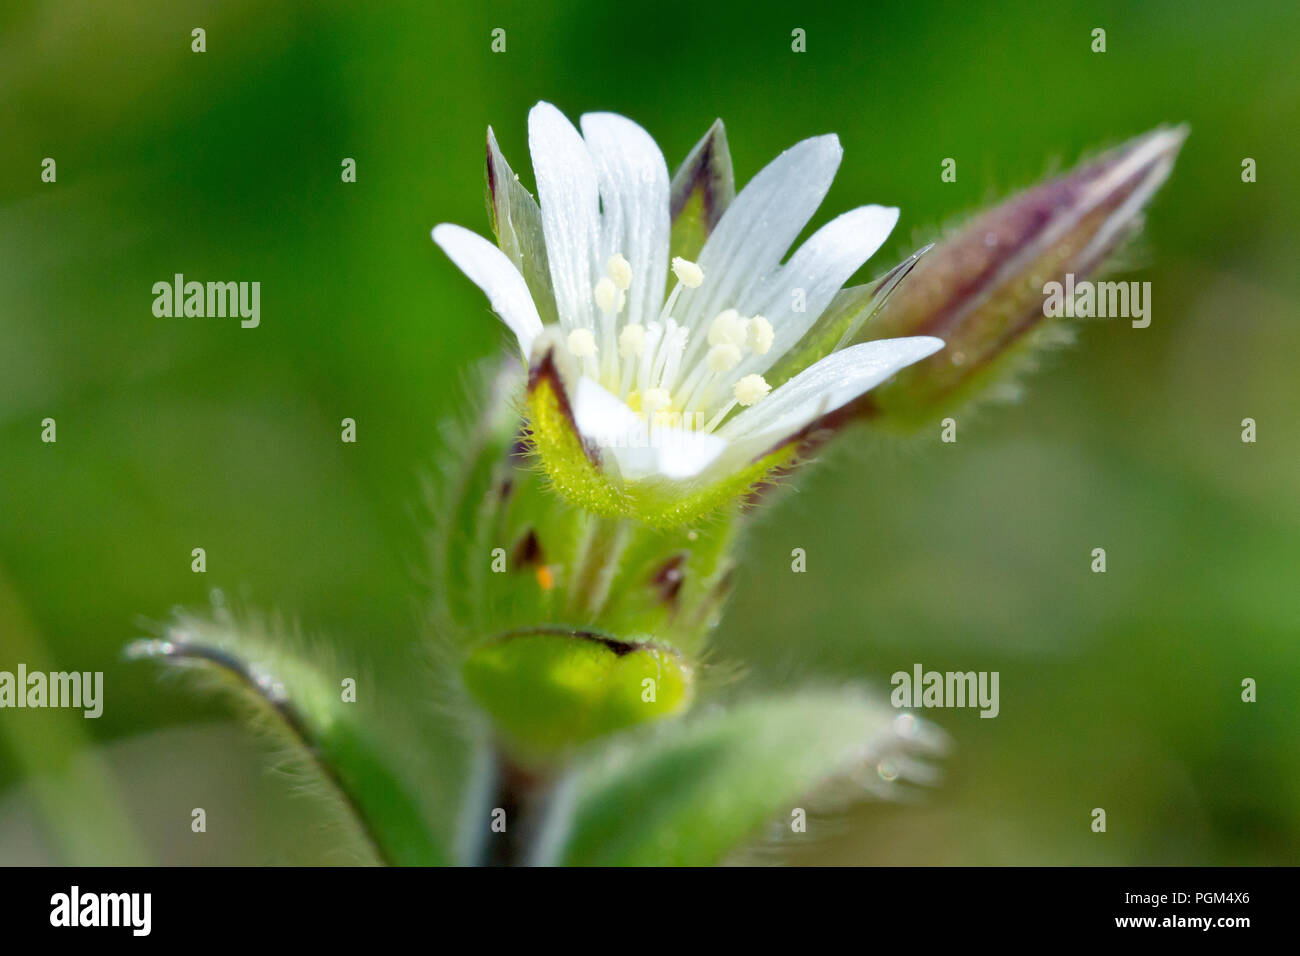 Common Chickweed (cerastium fontanum), also known as Mouse-ear Chickweed, a close up of the flower with bud. Stock Photo